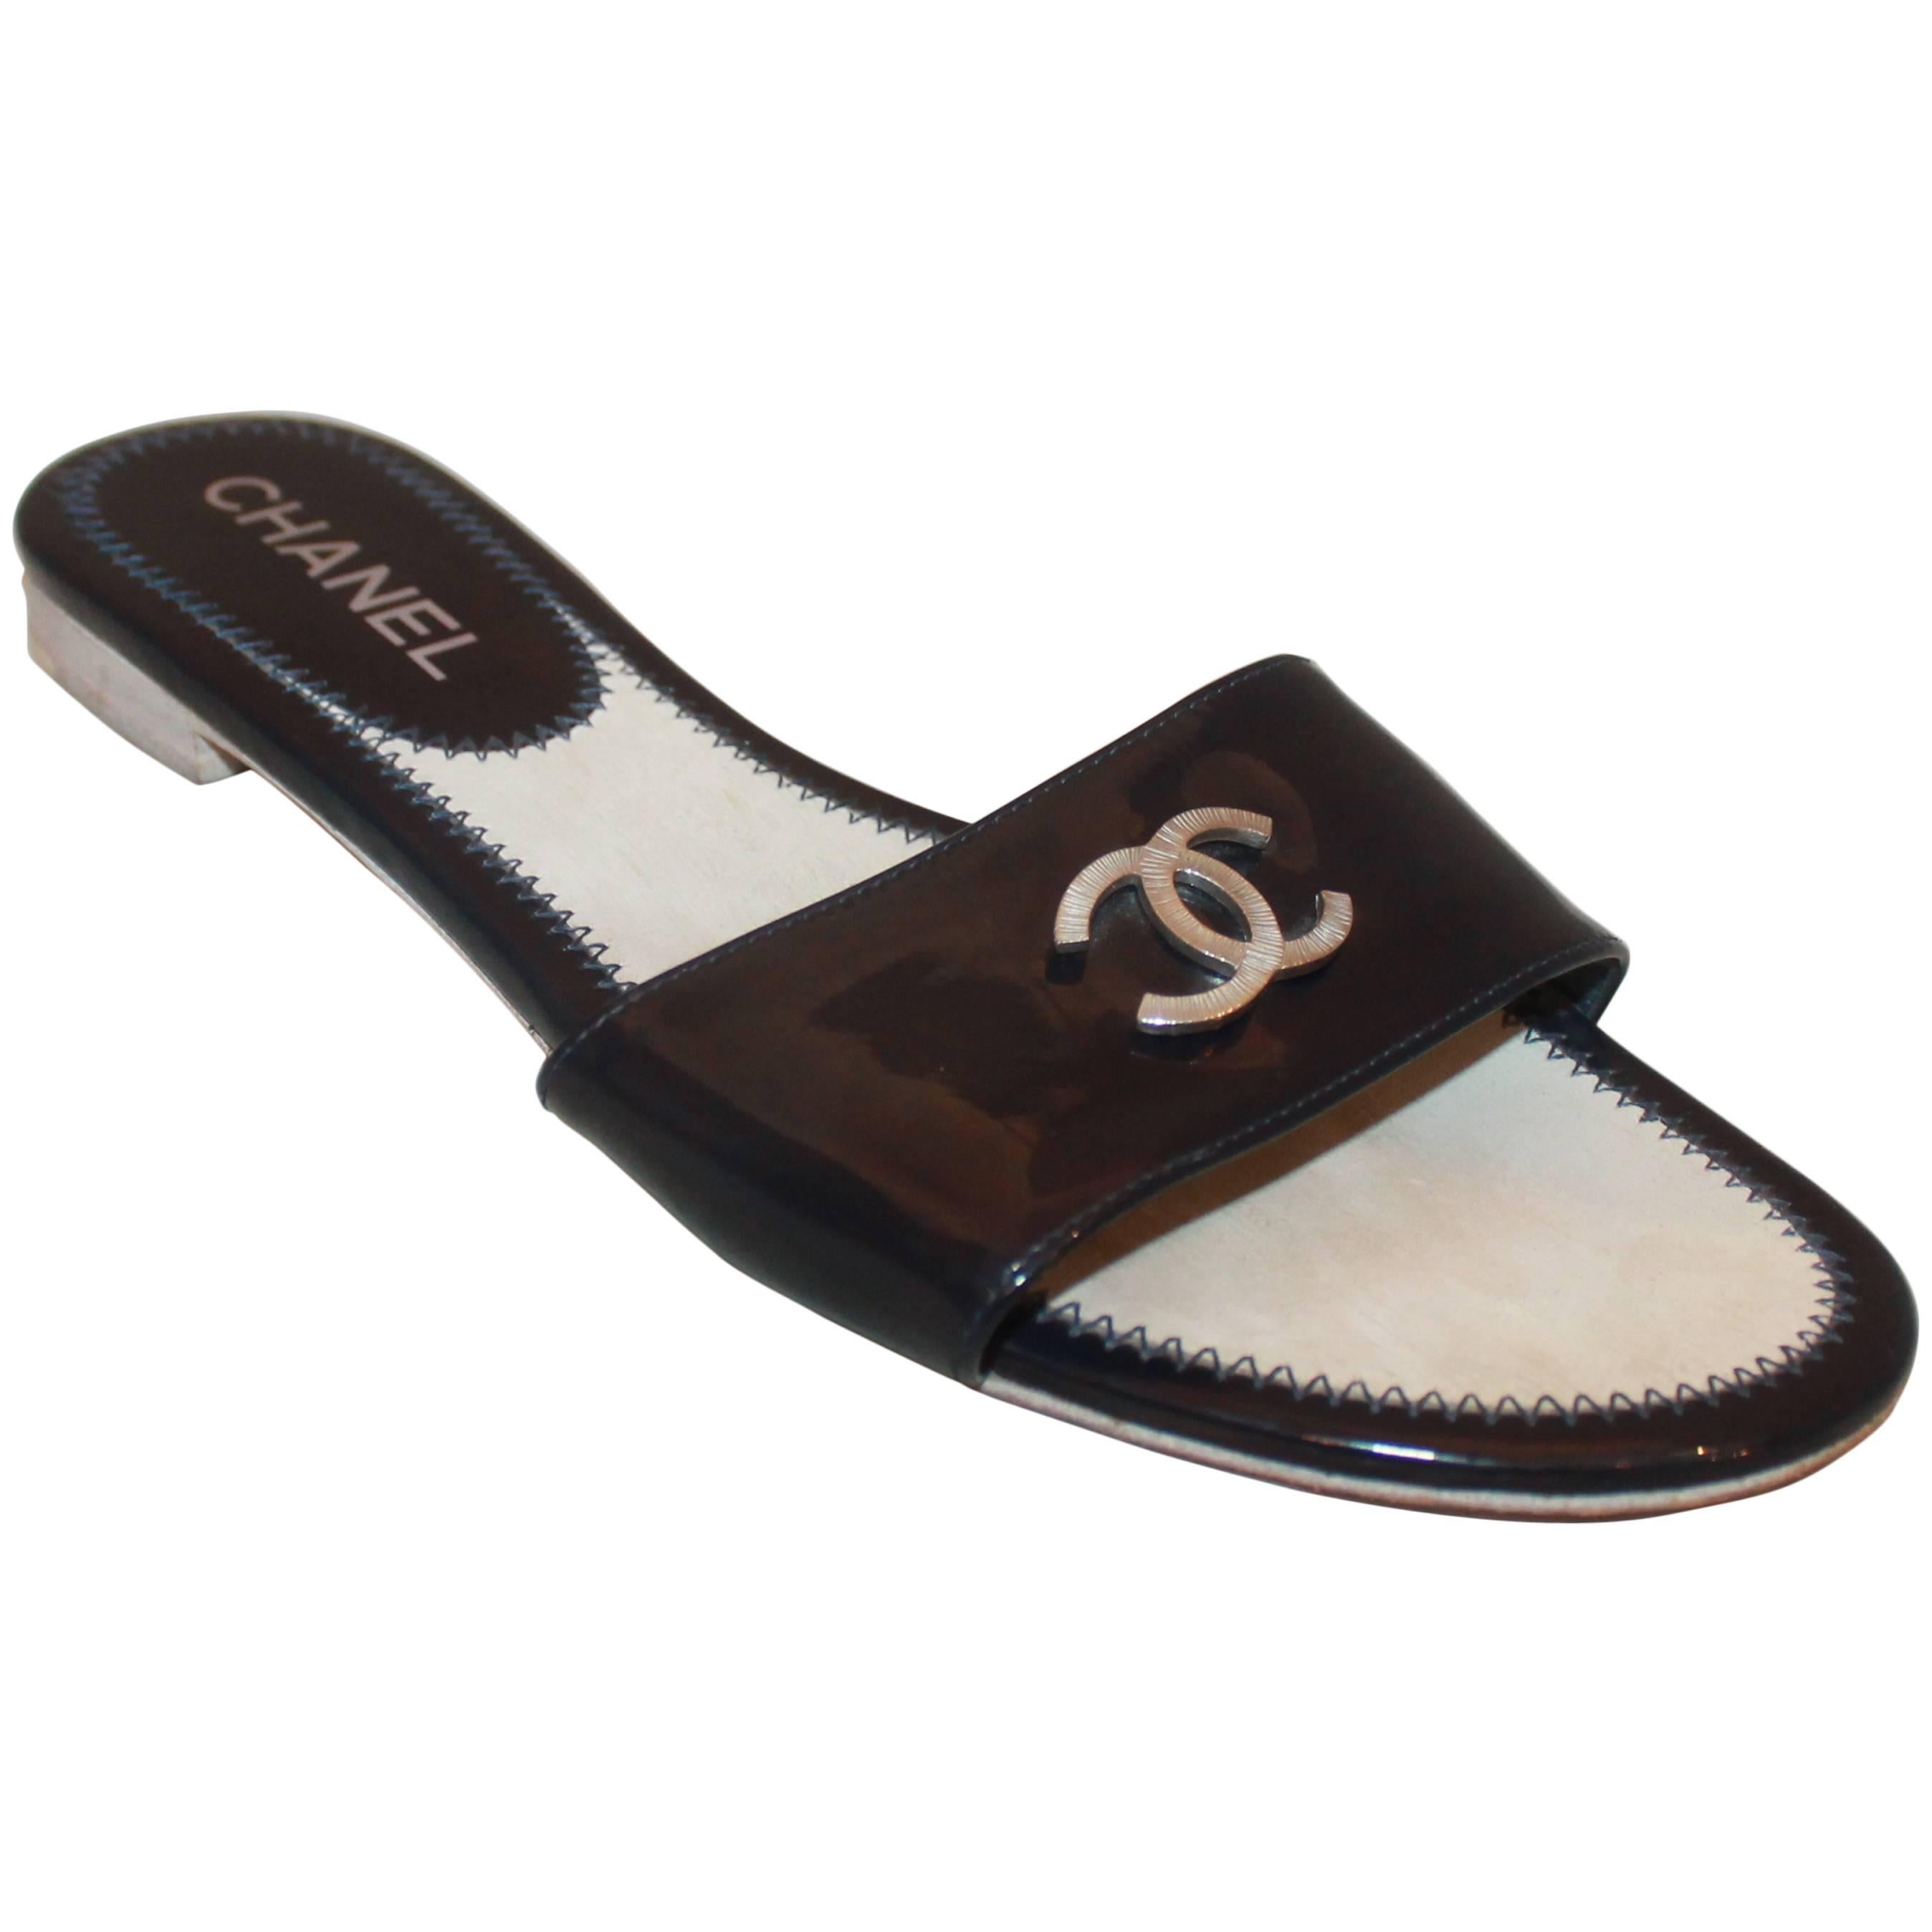 Chanel Navy Patent Slides with Silver Textured "CC" Flat Sandals - 38